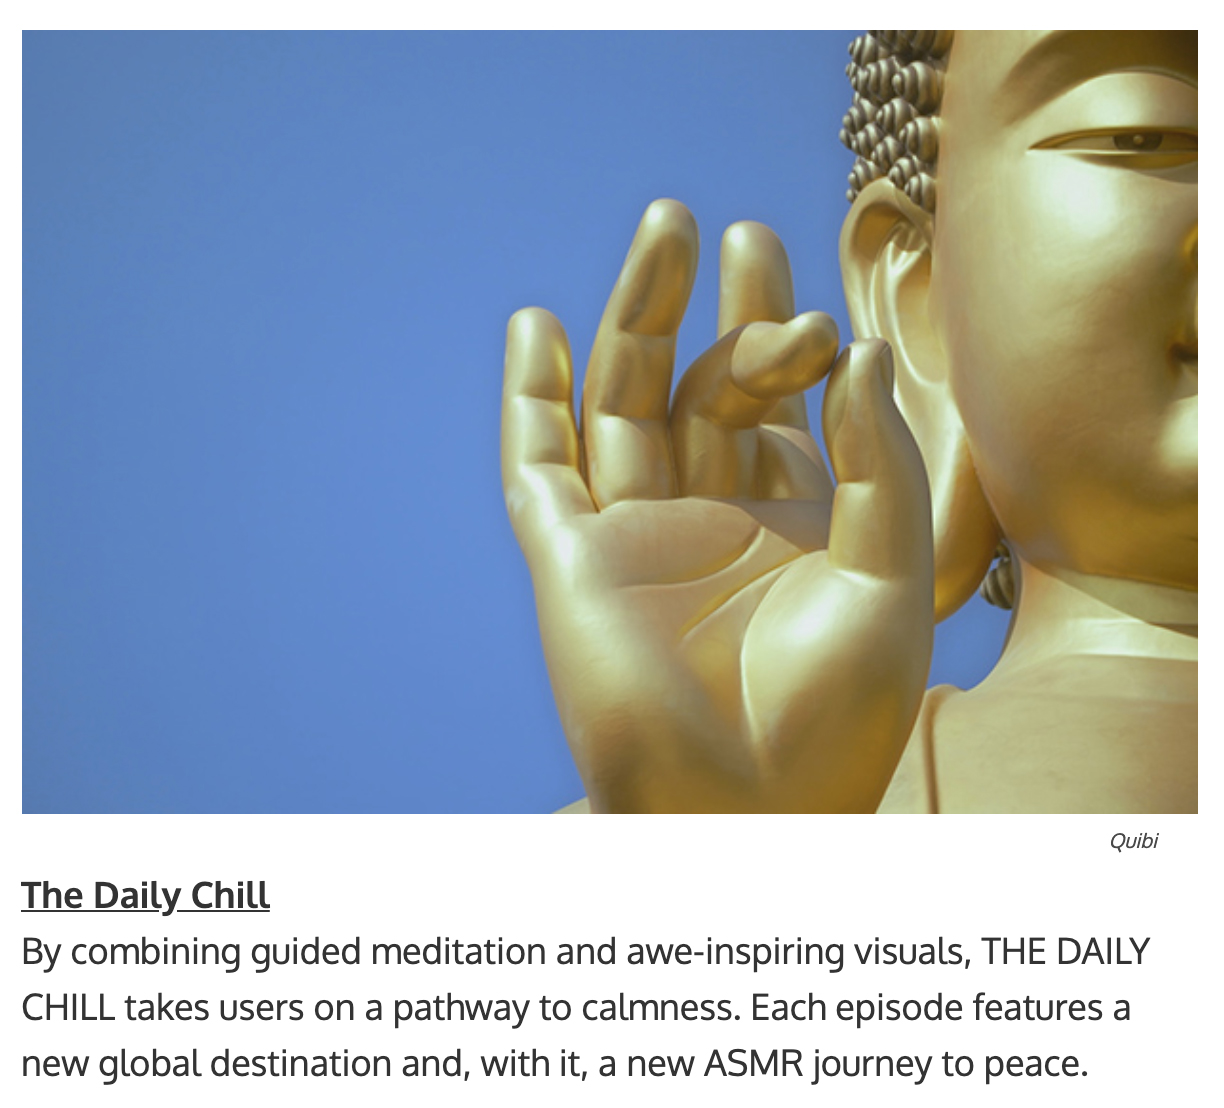 quibi show titles - By combining guided meditation and awe-inspiring visuals, THE DAILY CHILL takes users on a pathway to calmness. Each episode features a new global destination and, with it, a new ASMR journey to peace.